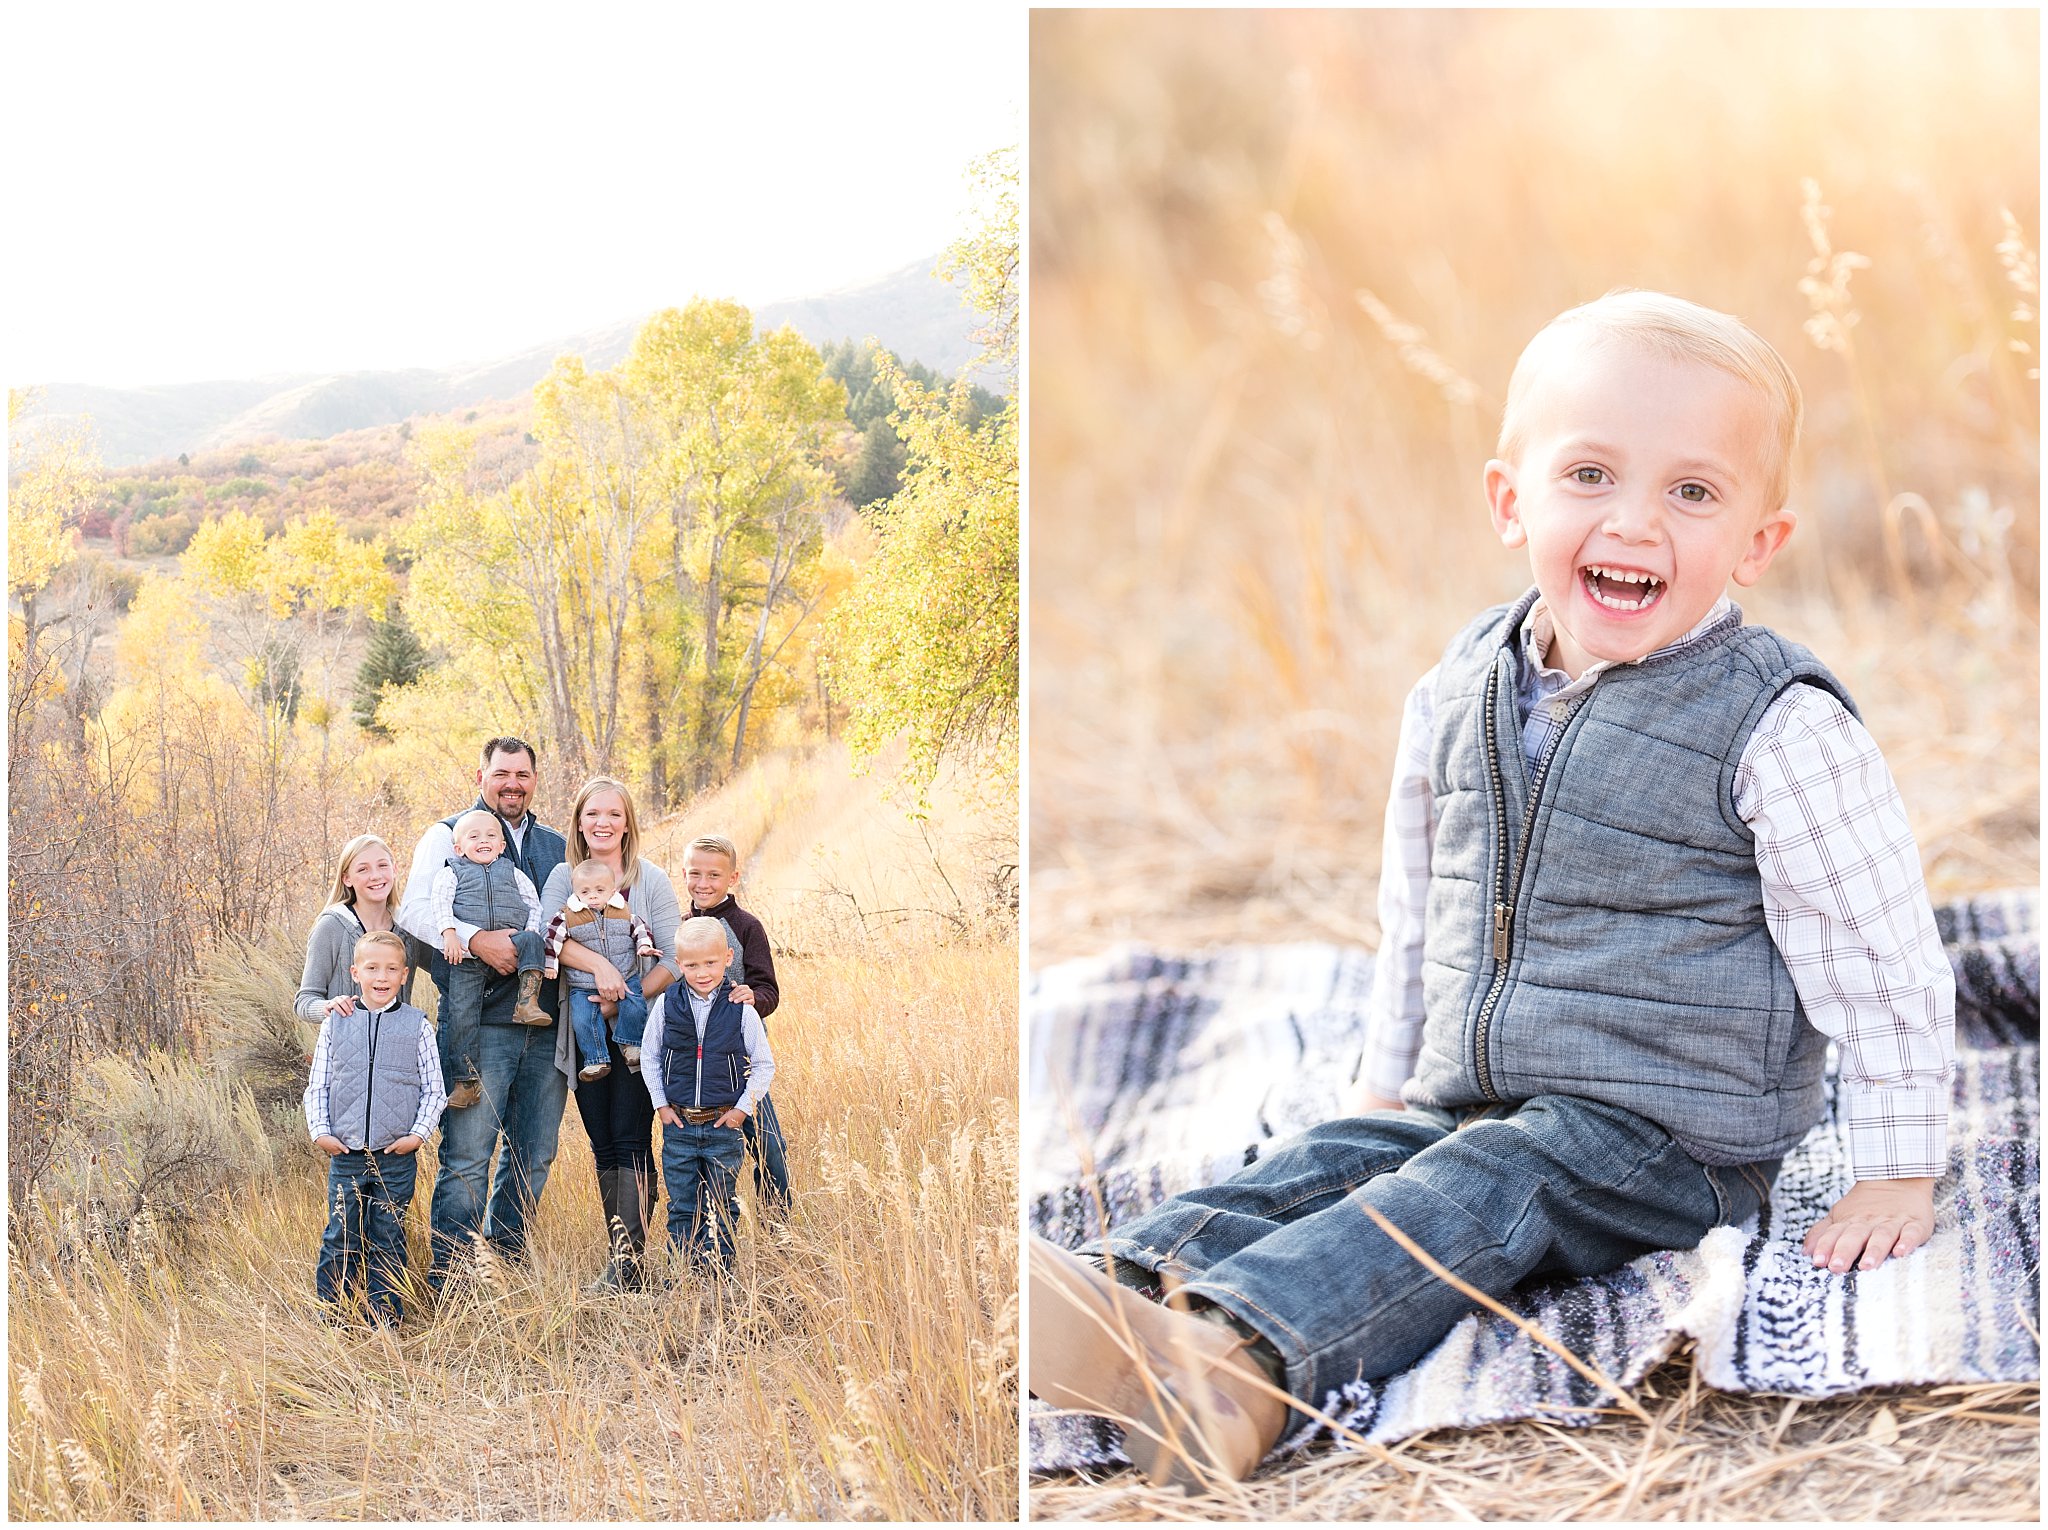 Two year old boy laughing and family of 8 portrait | Fall family photo session at Snowbasin | Snowbasin Resort | Jessie and Dallin Photography